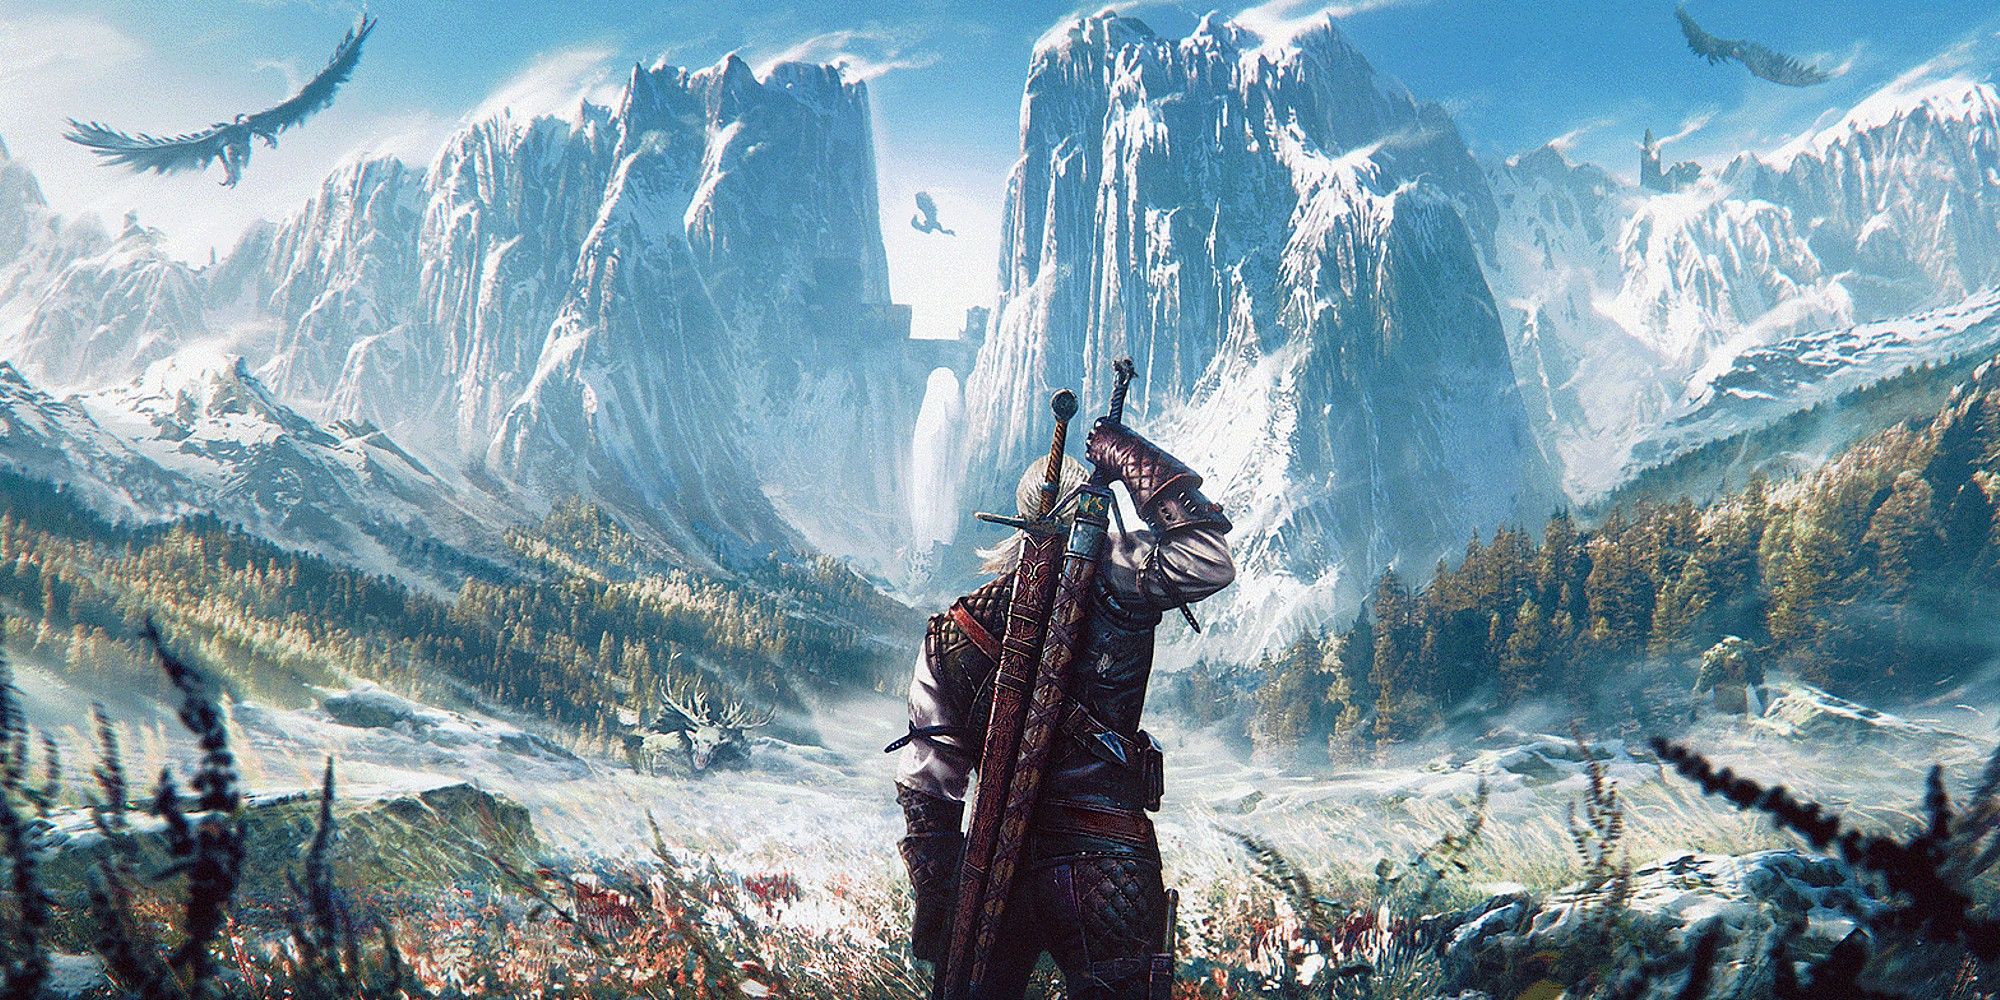 The Witcher 3 Geralt Turned Back Reaching For His Silver Sword Against The Backdrop Of Snowy Mountains